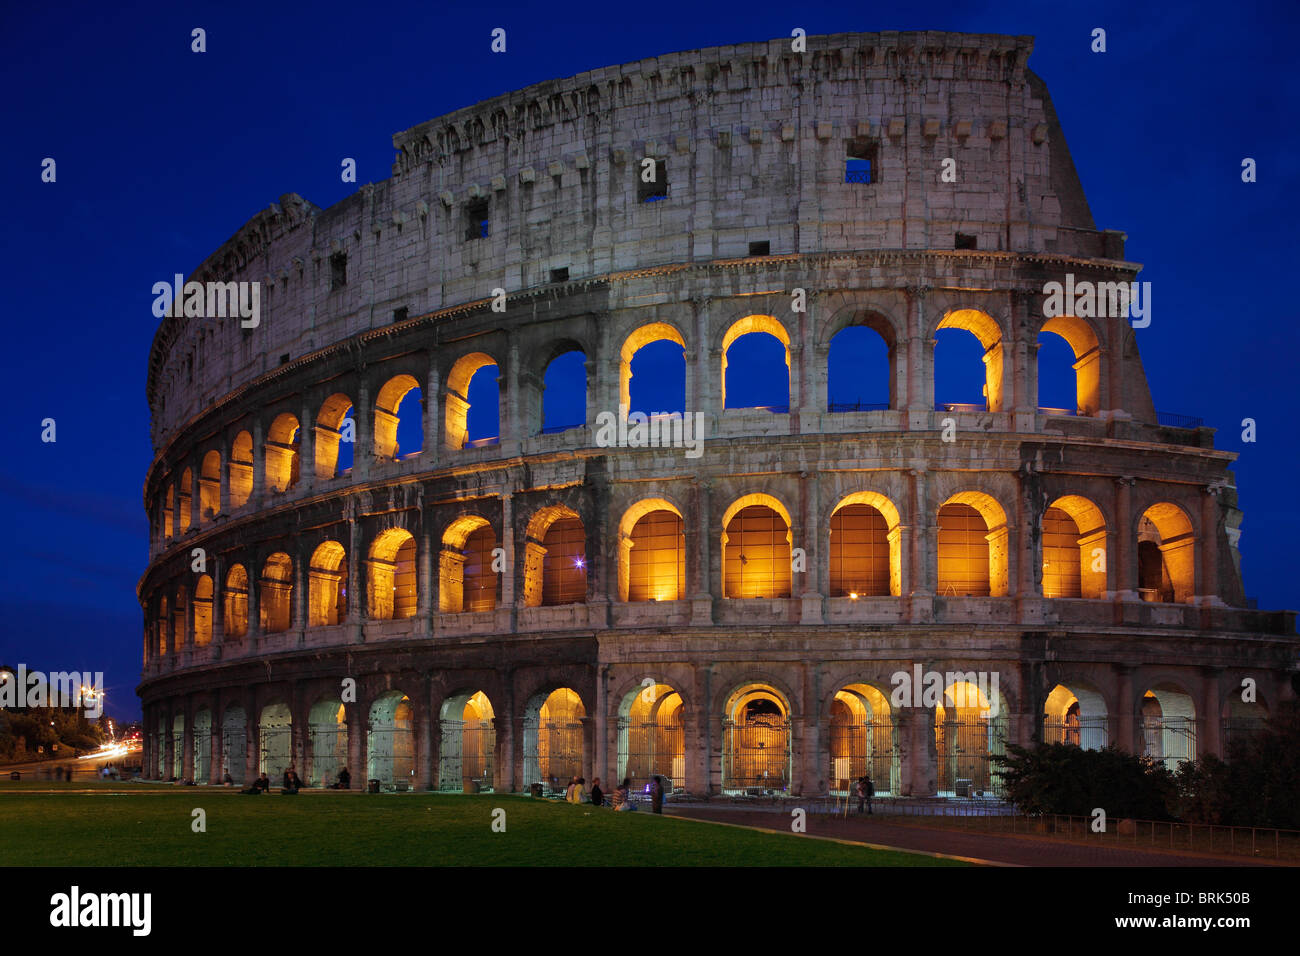 The Colosseum, or Roman Coliseum, in Rome, Italy is lit up at night Stock  Photo - Alamy